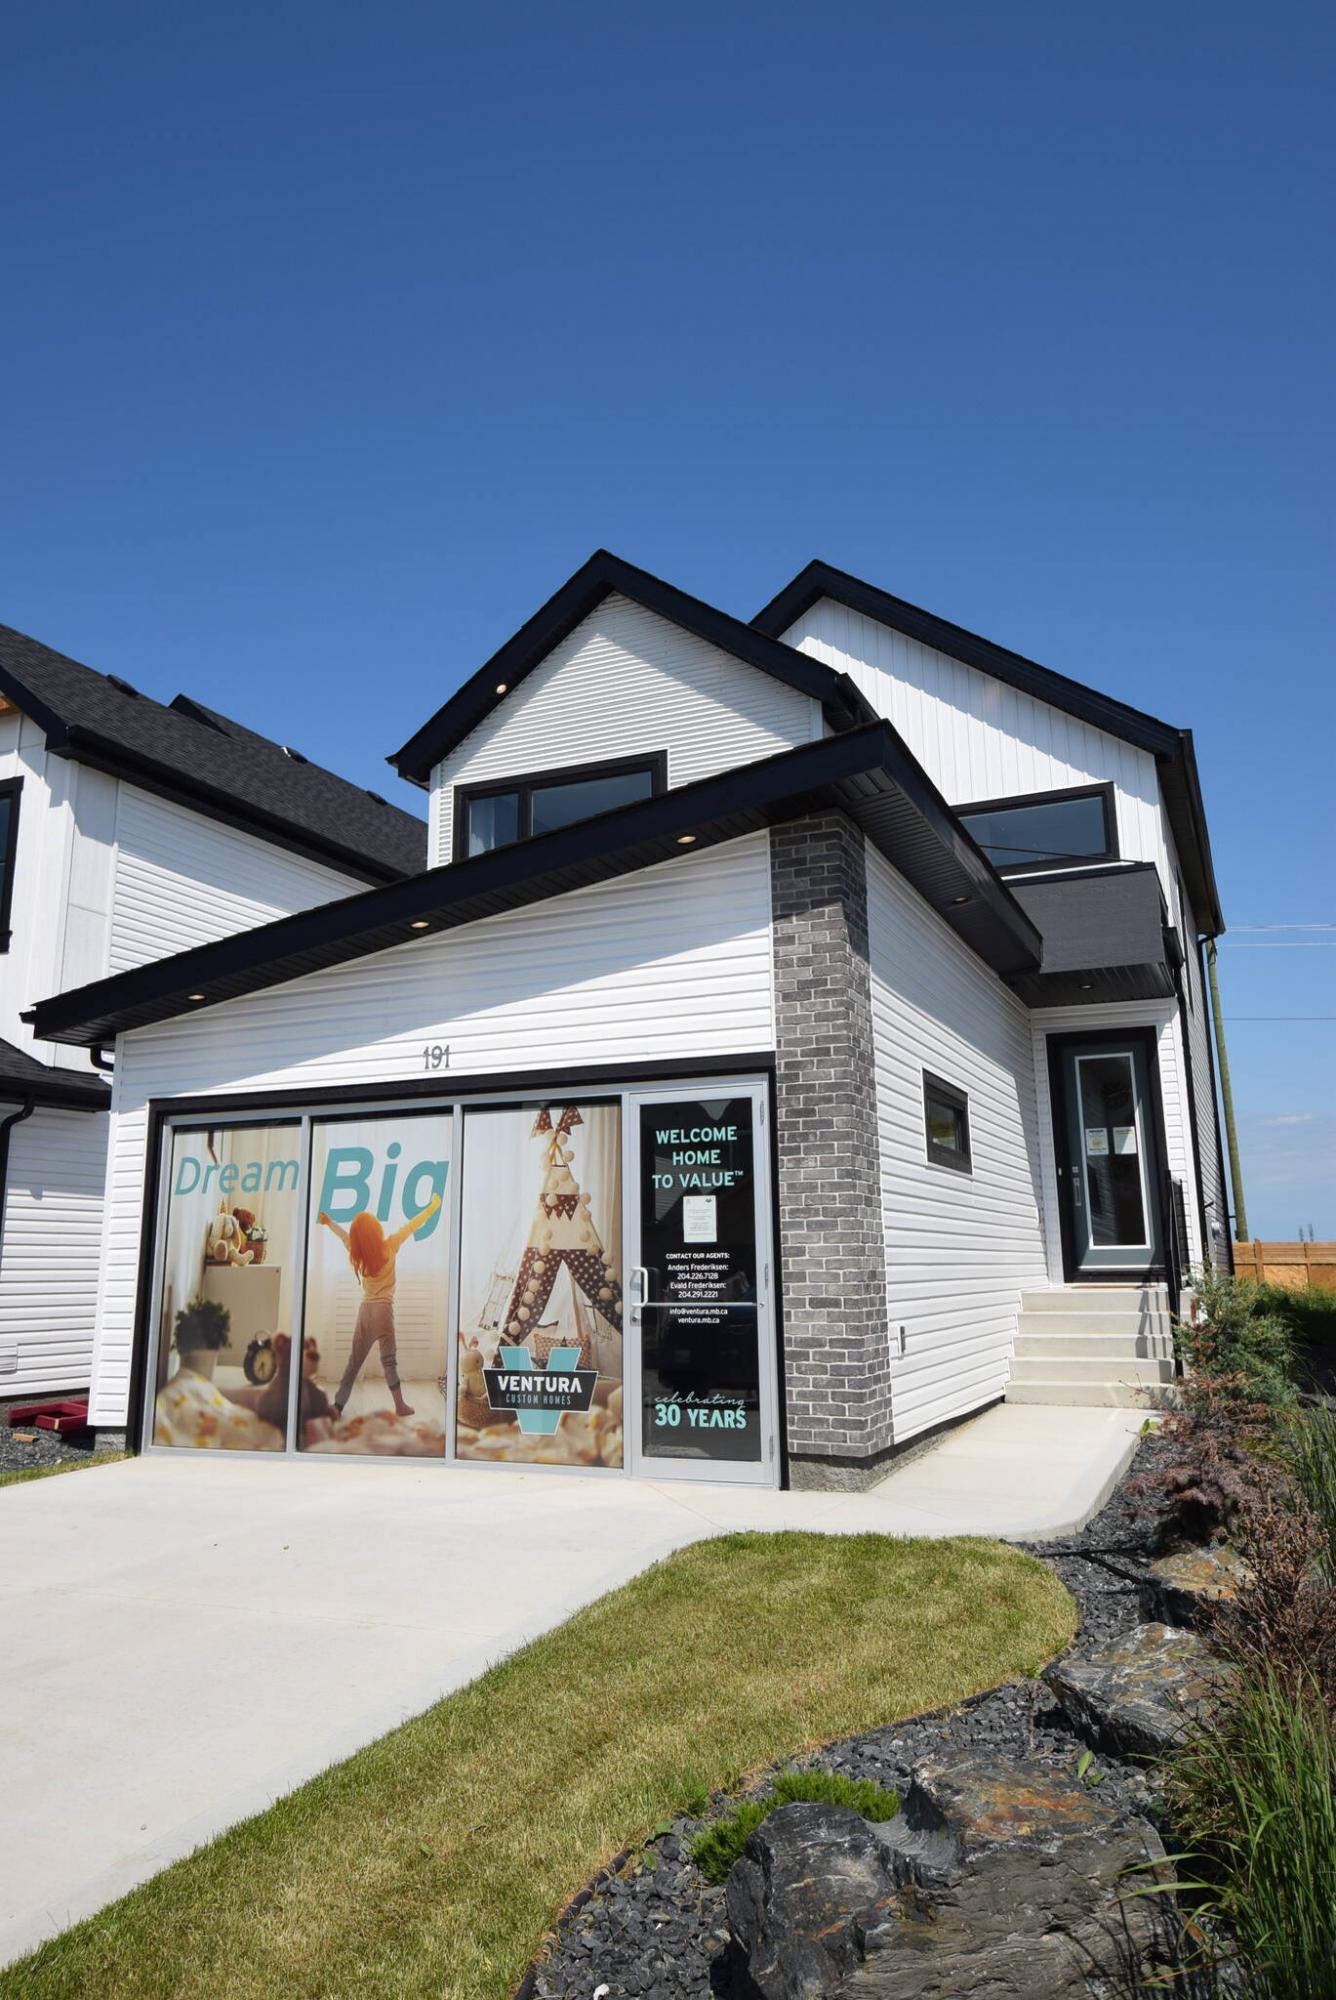 <p>Todd Lewys / Winnipeg Free Press</p><p>The two-storey Bristol is a well-conceived design that offers family-friendly style and function from top to bottom.</p>